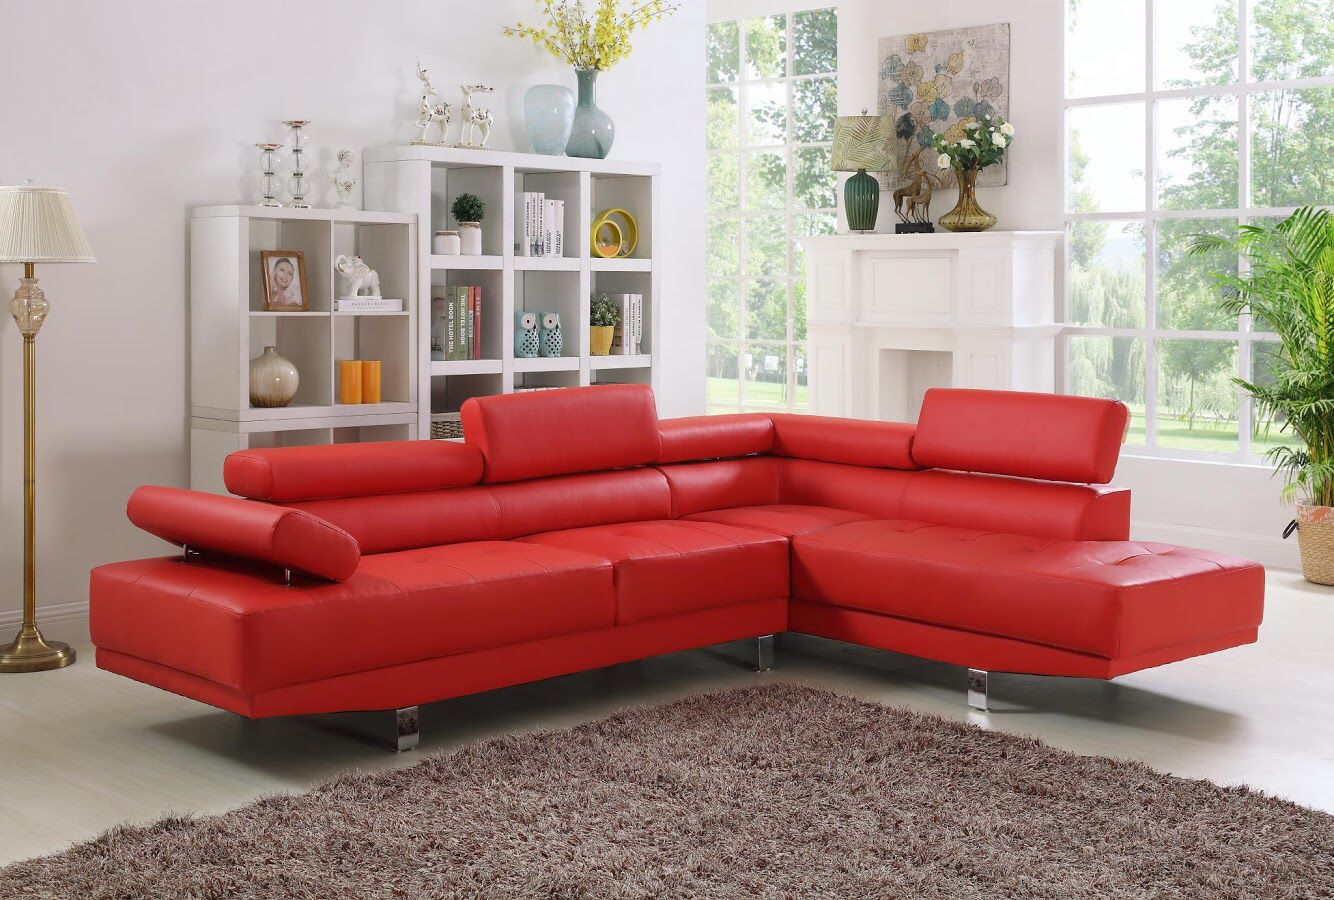 SECTIONAL | LIVING ROOM | COUCH | LOVESEAT | SOFA | JUEGO DE SALA | DELIVERY FREE BY TMF 🚚📦